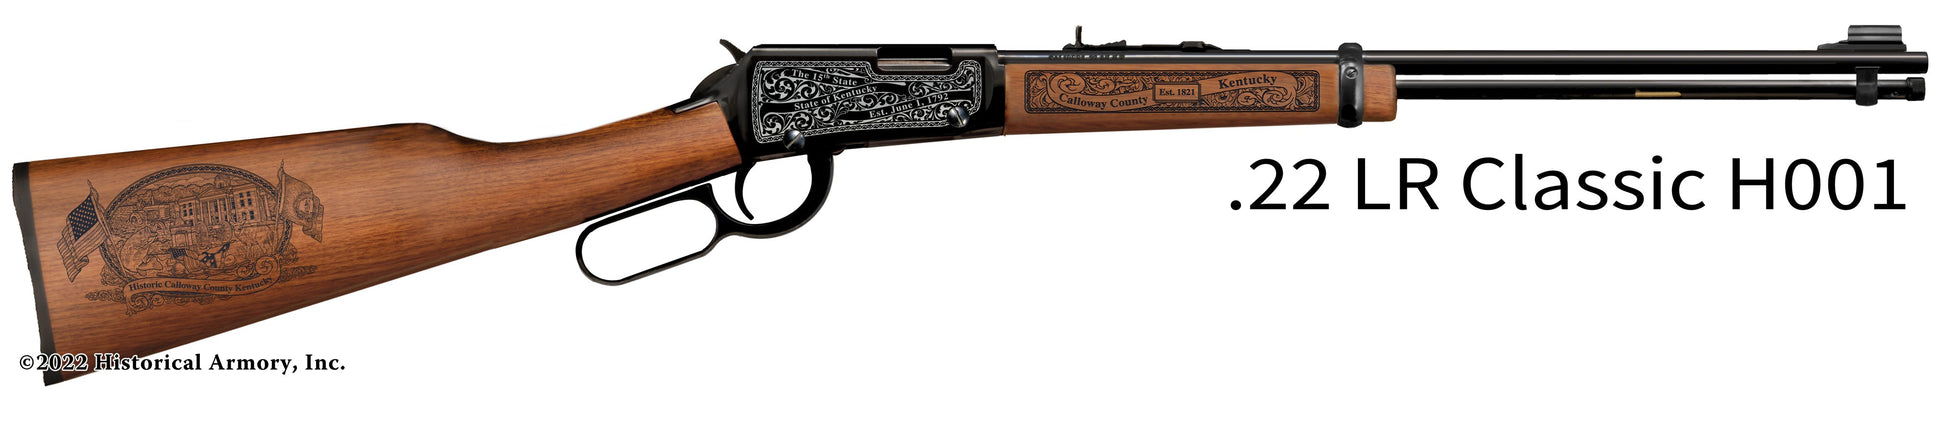 Calloway County Kentucky Engraved Henry H001 Rifle